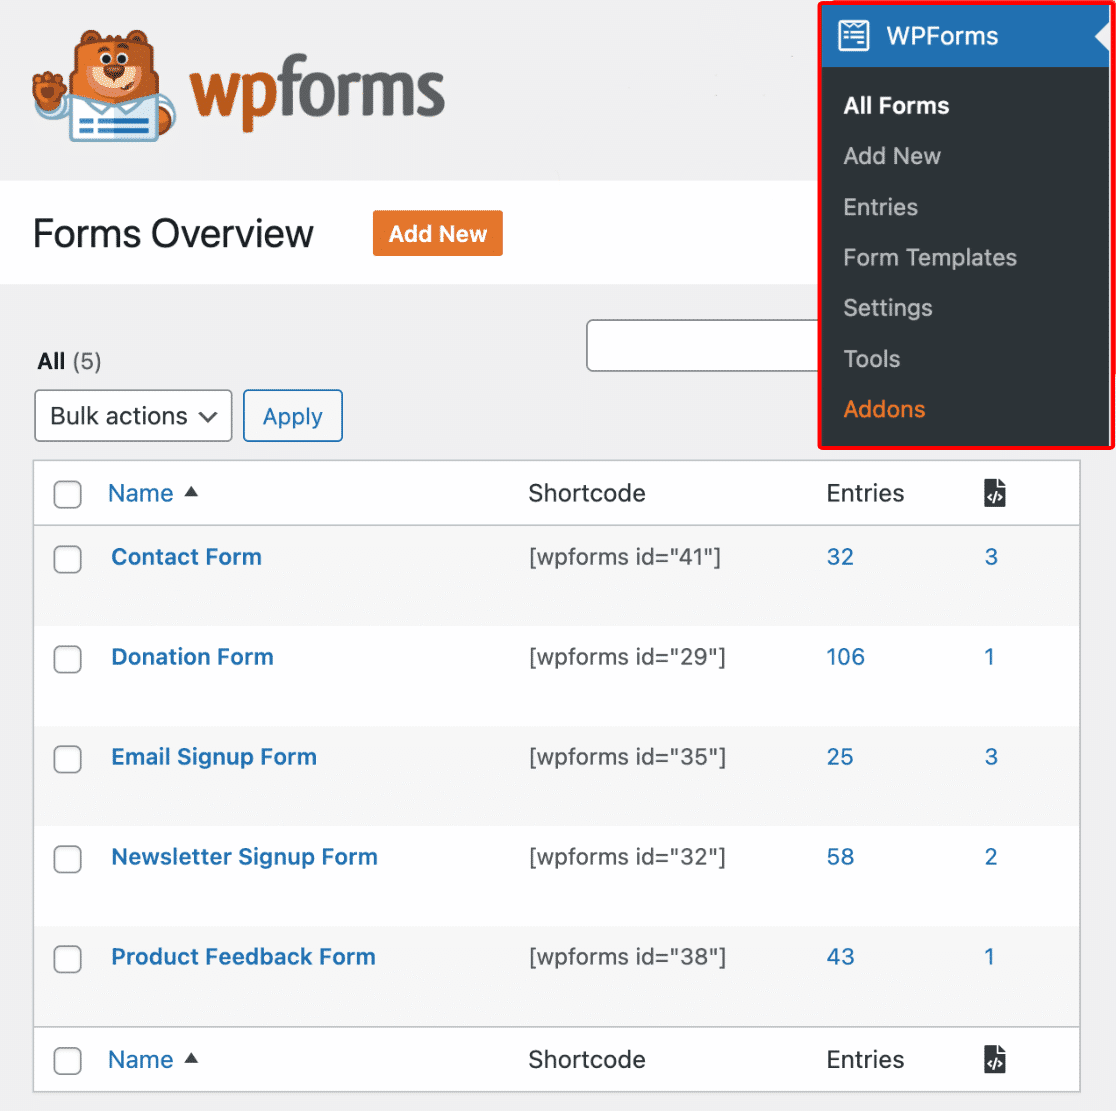 The WPForms Forms Overview page